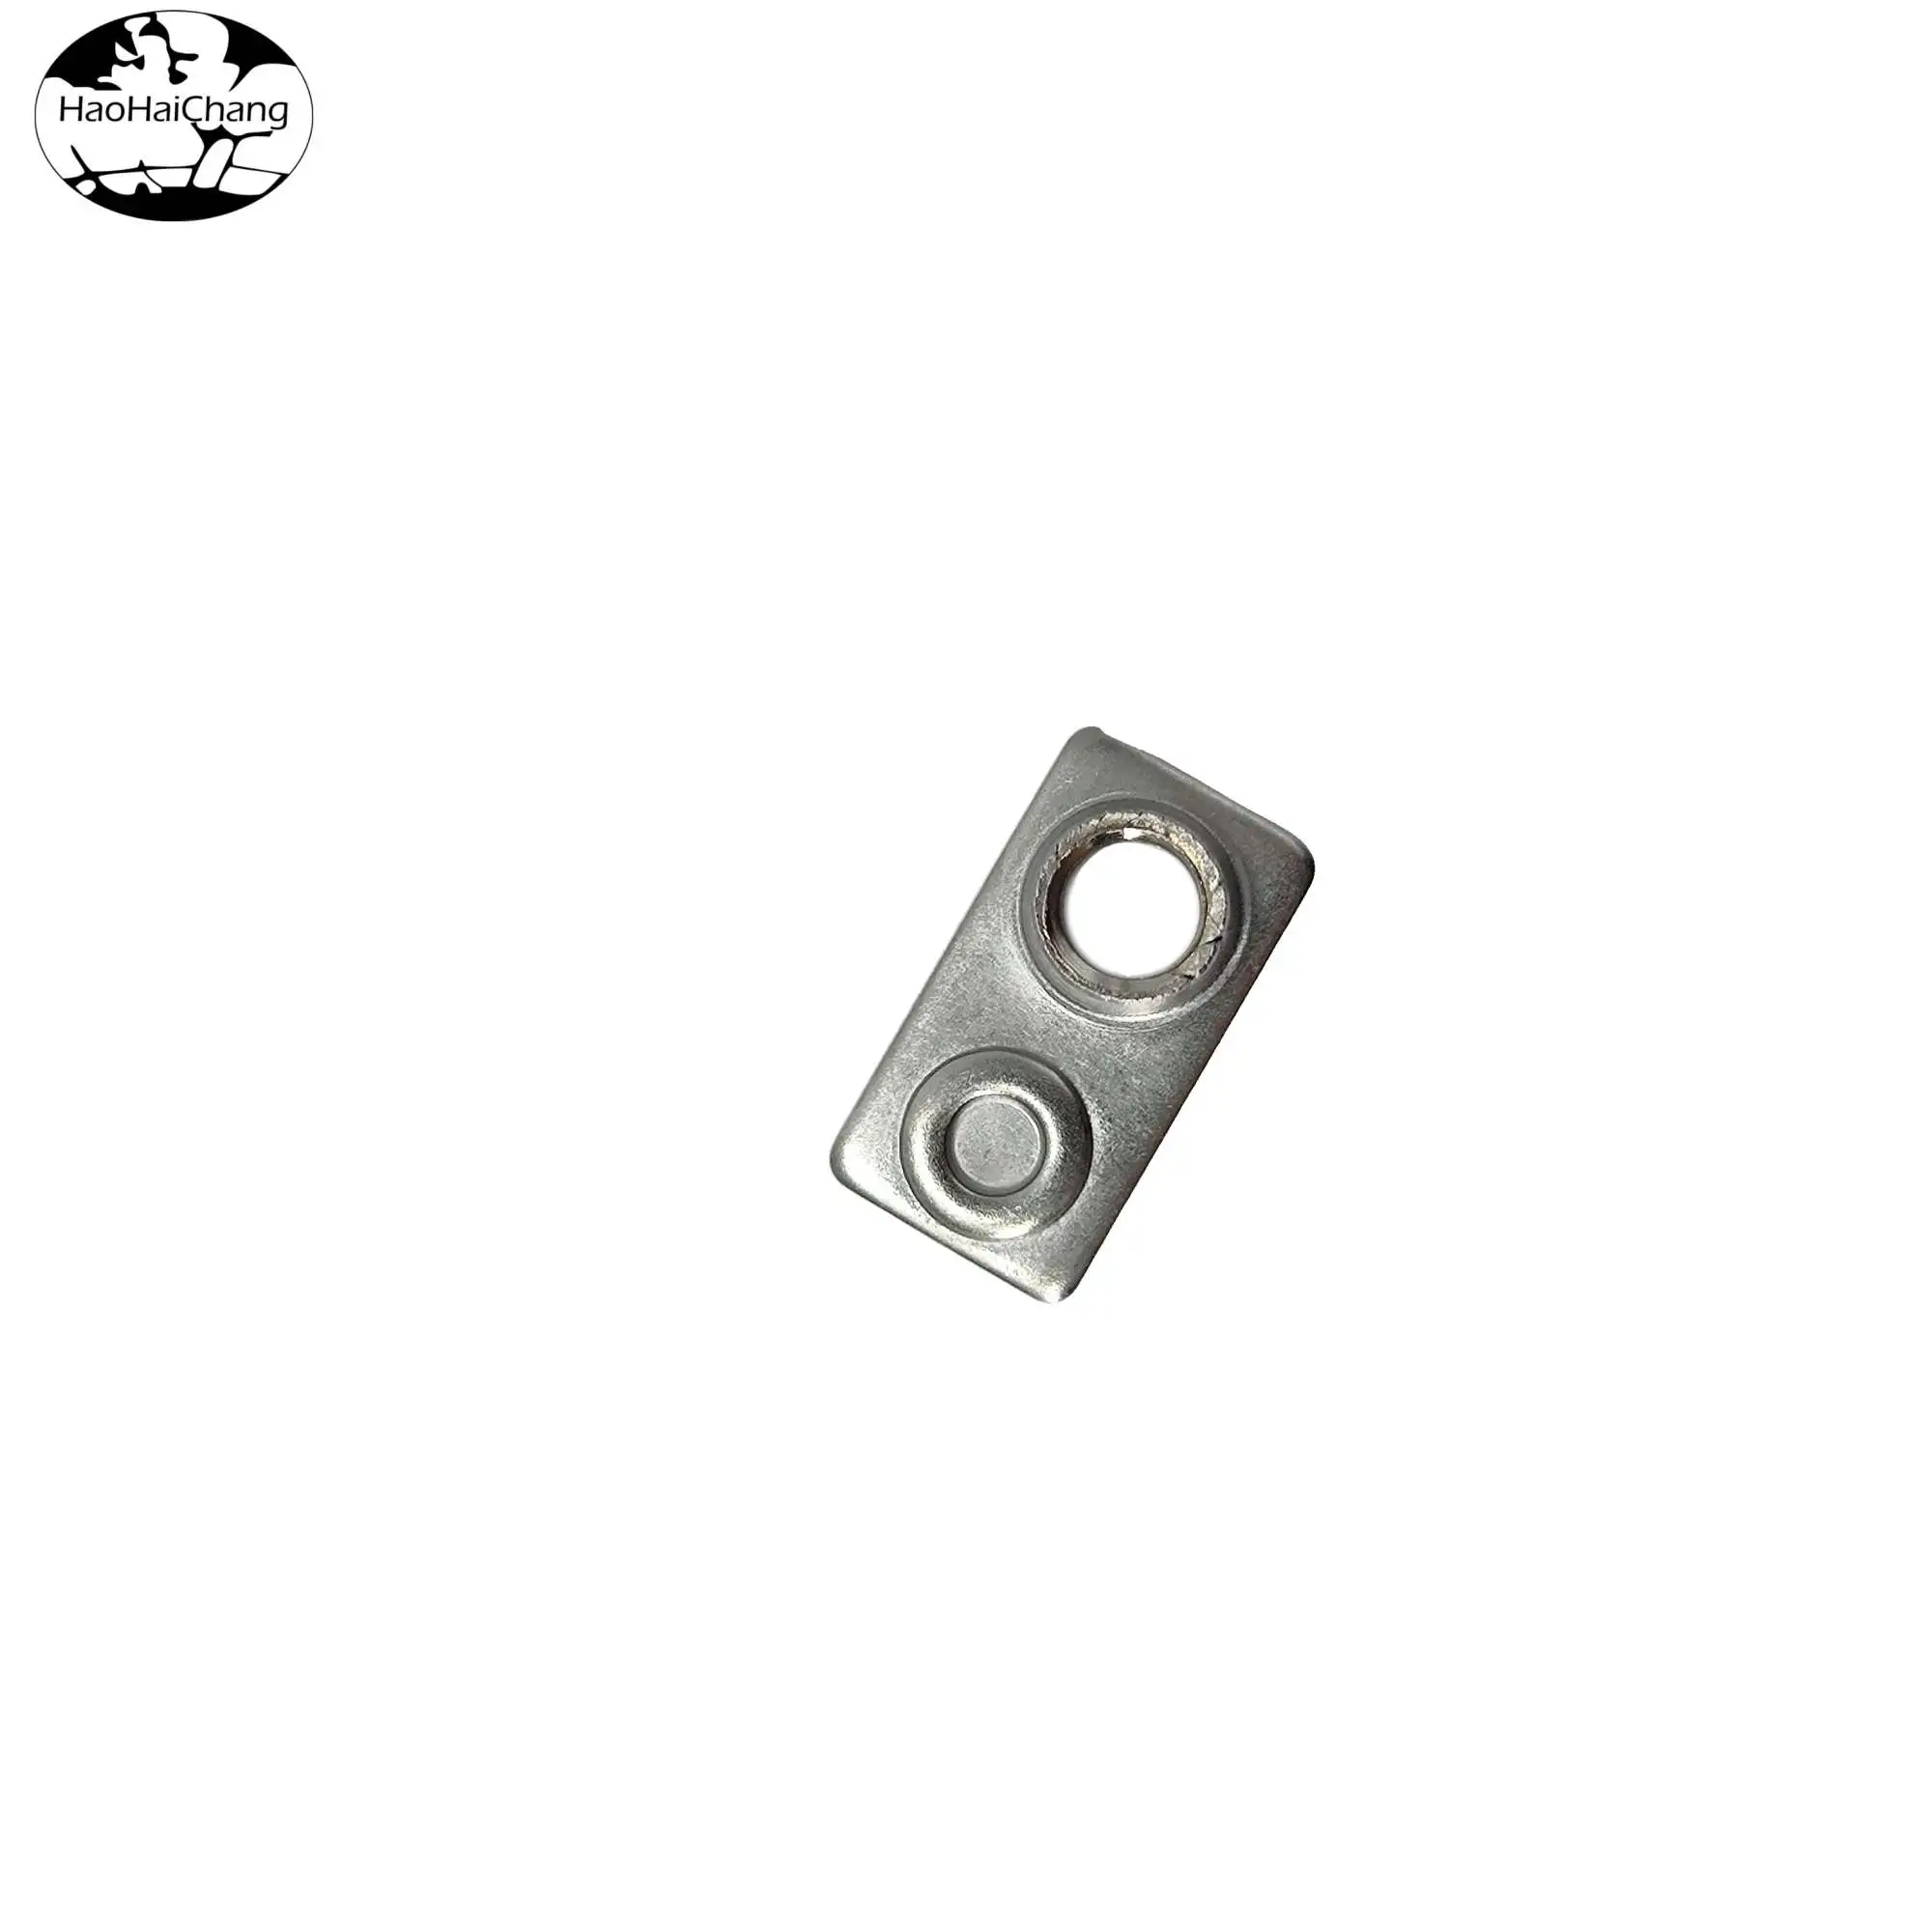 HHC-0296 Connector